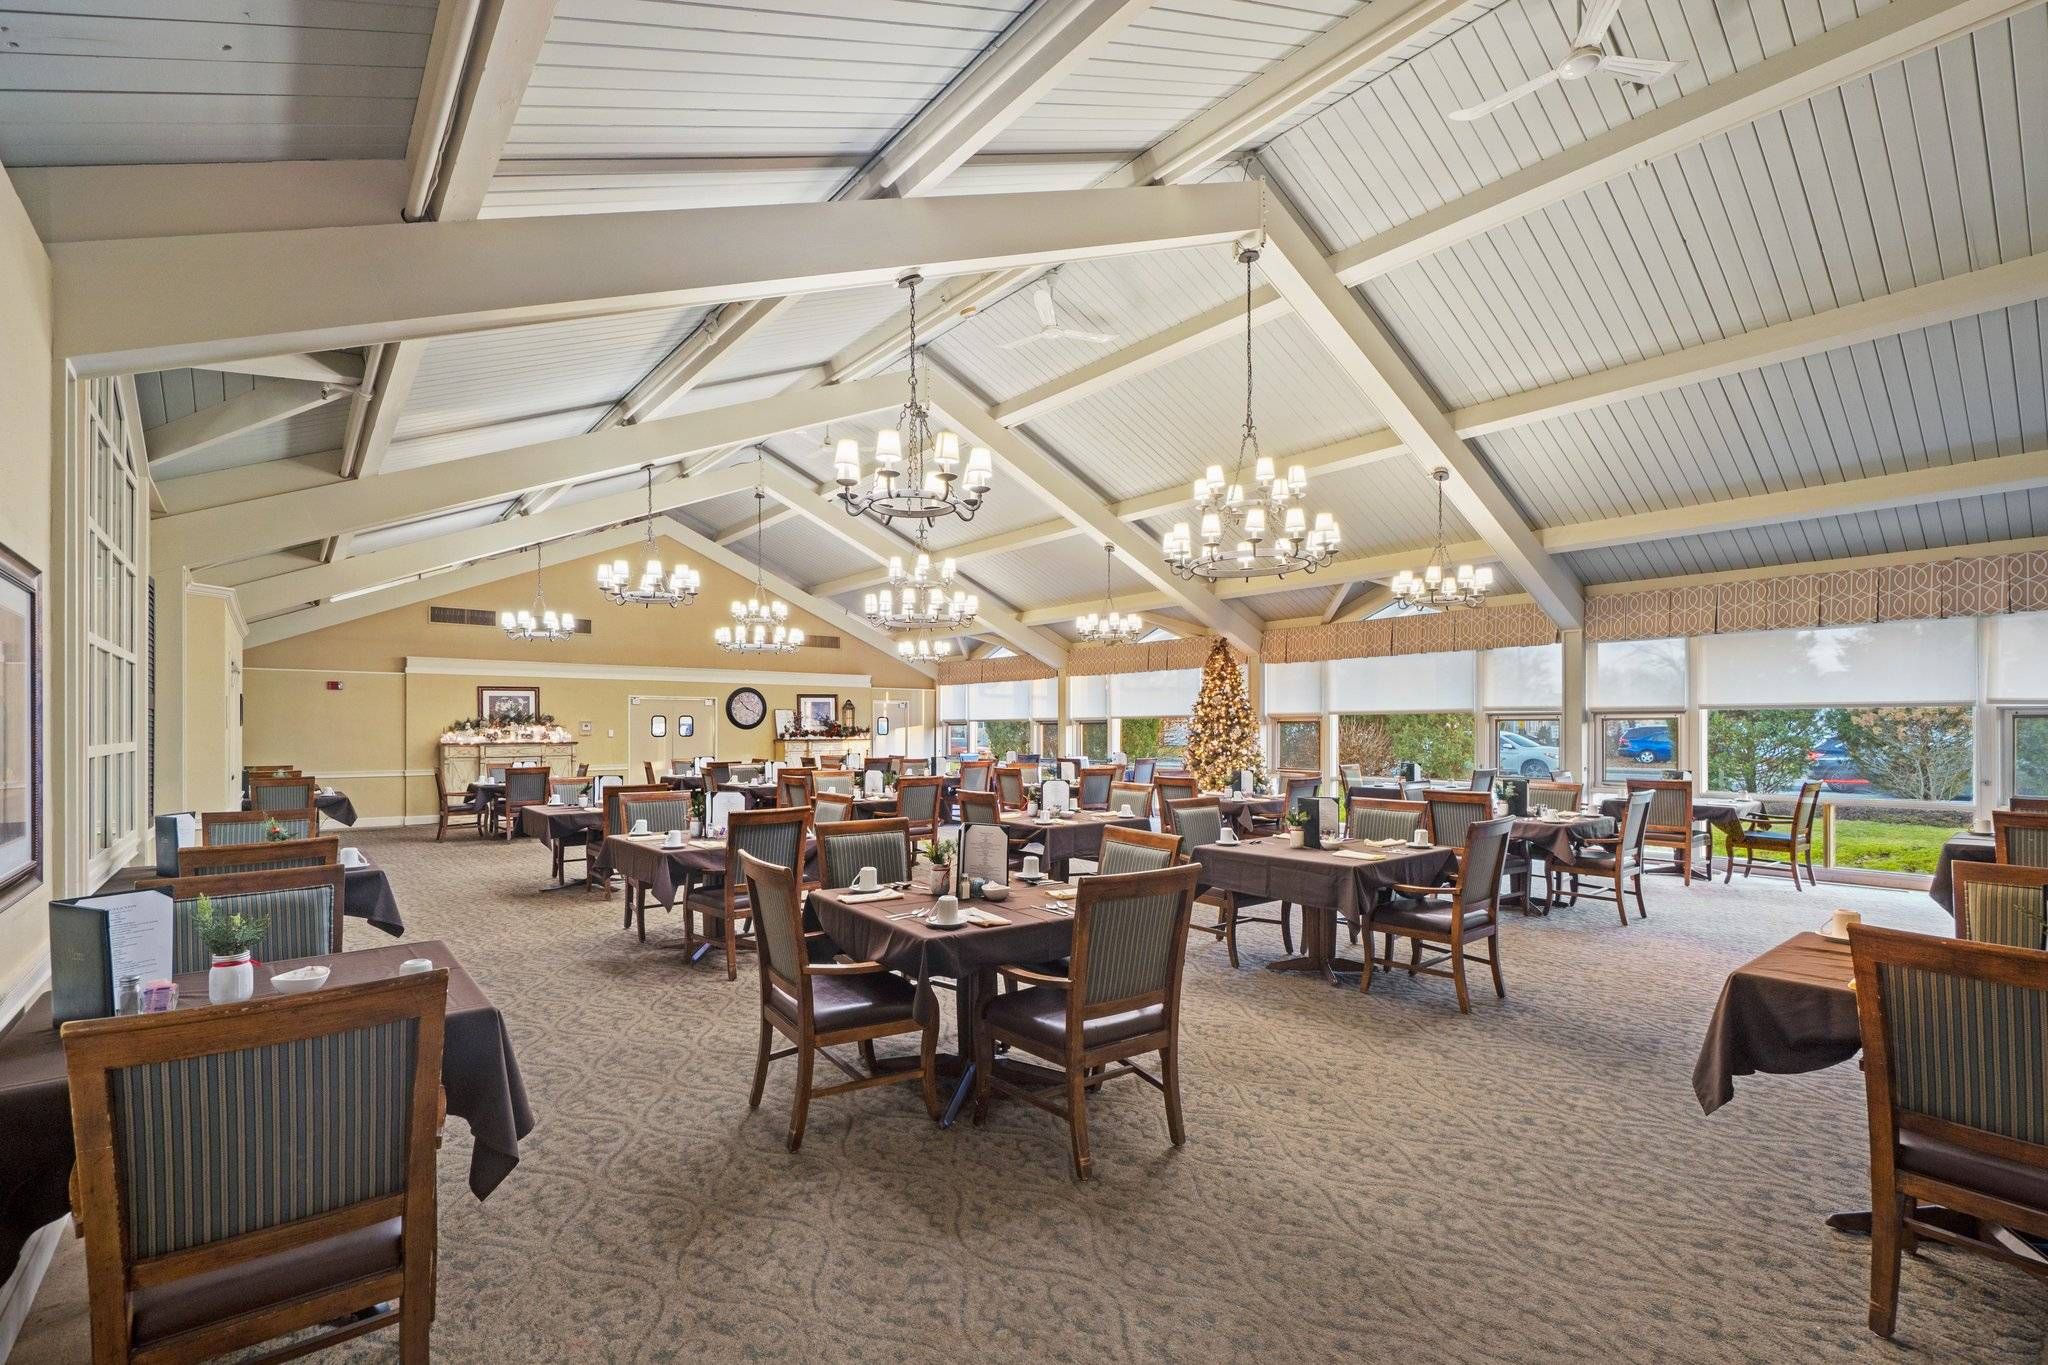 Senior living community cafeteria at Halcyon at West Bay featuring modern architecture and decor.